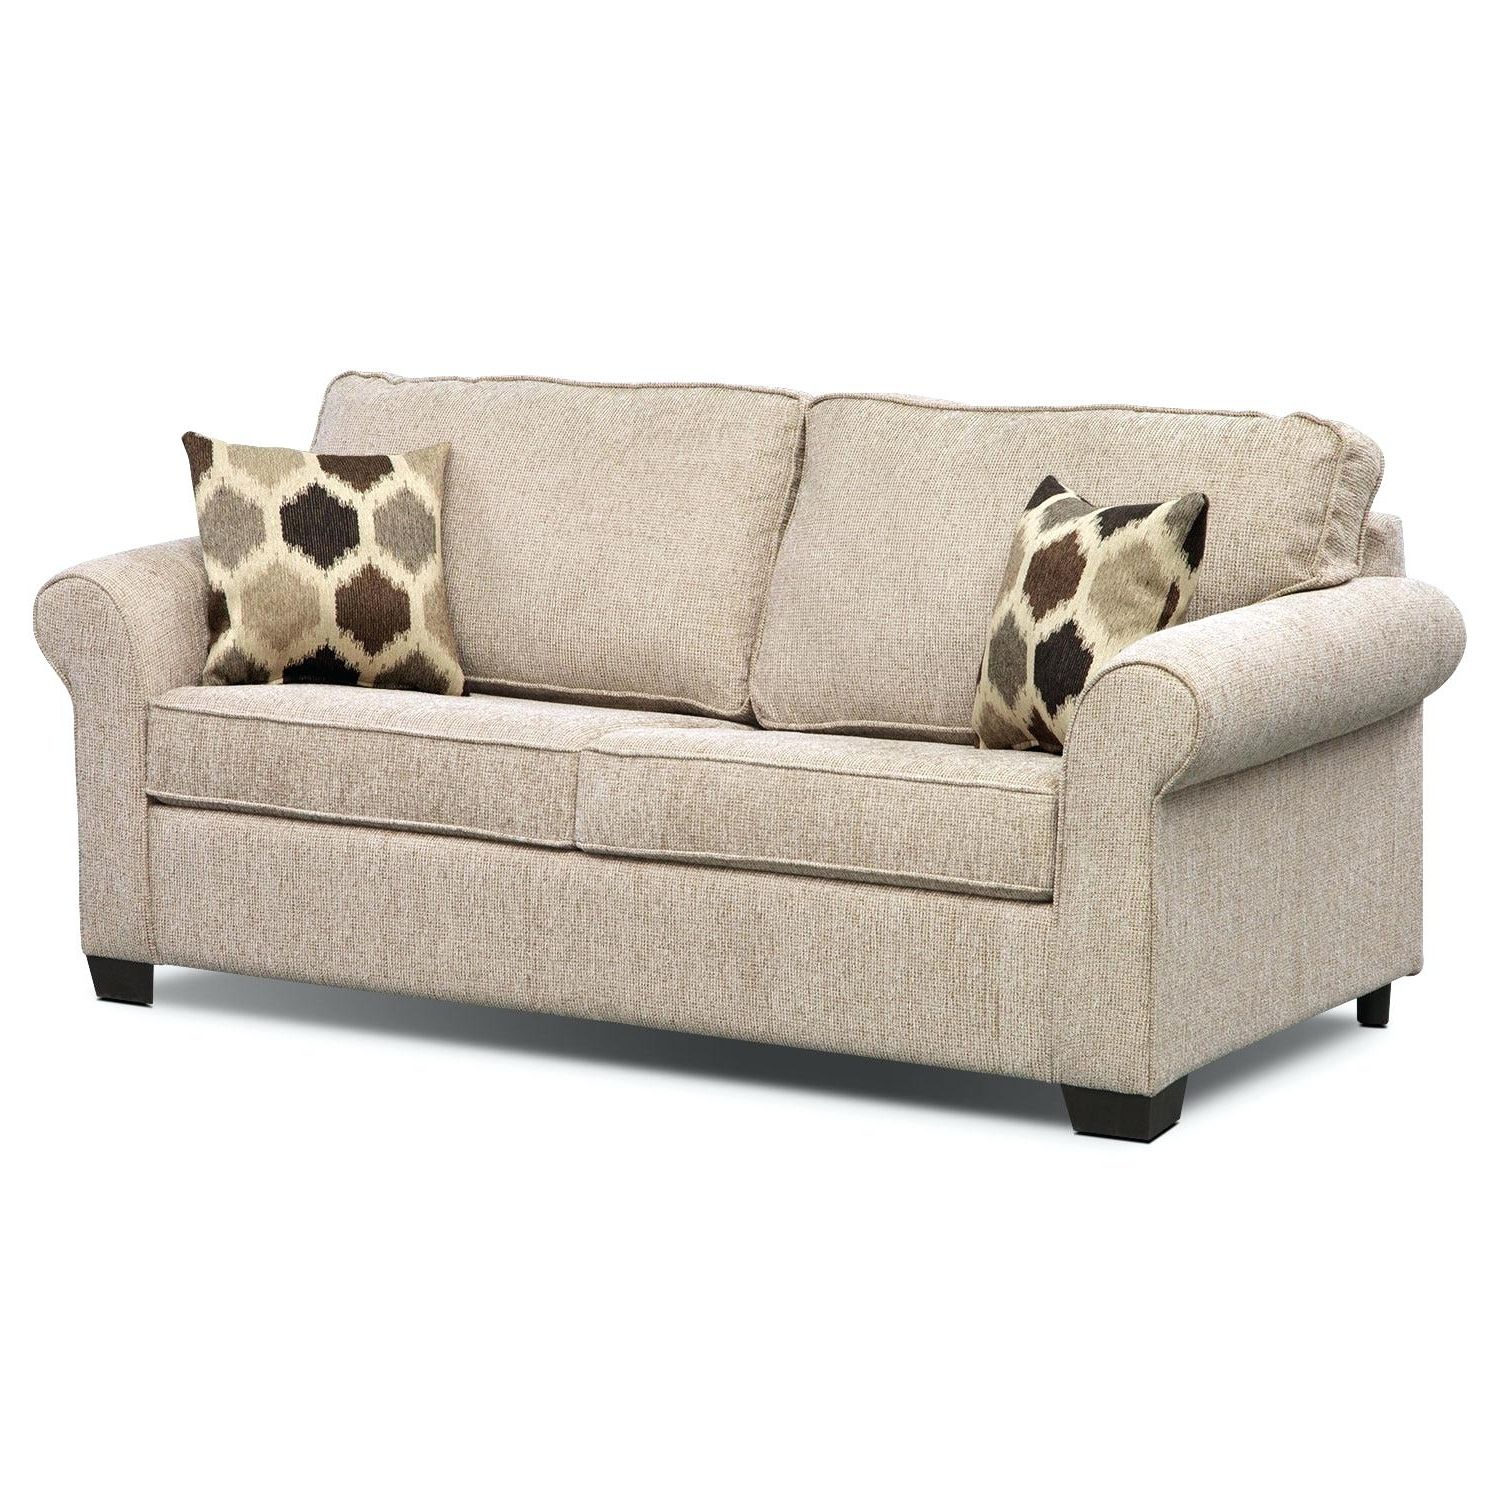 Popular Value City Sleeper Sofa Medium Size Of Sectional Sofas Value City In Panama City Fl Sectional Sofas (View 4 of 15)